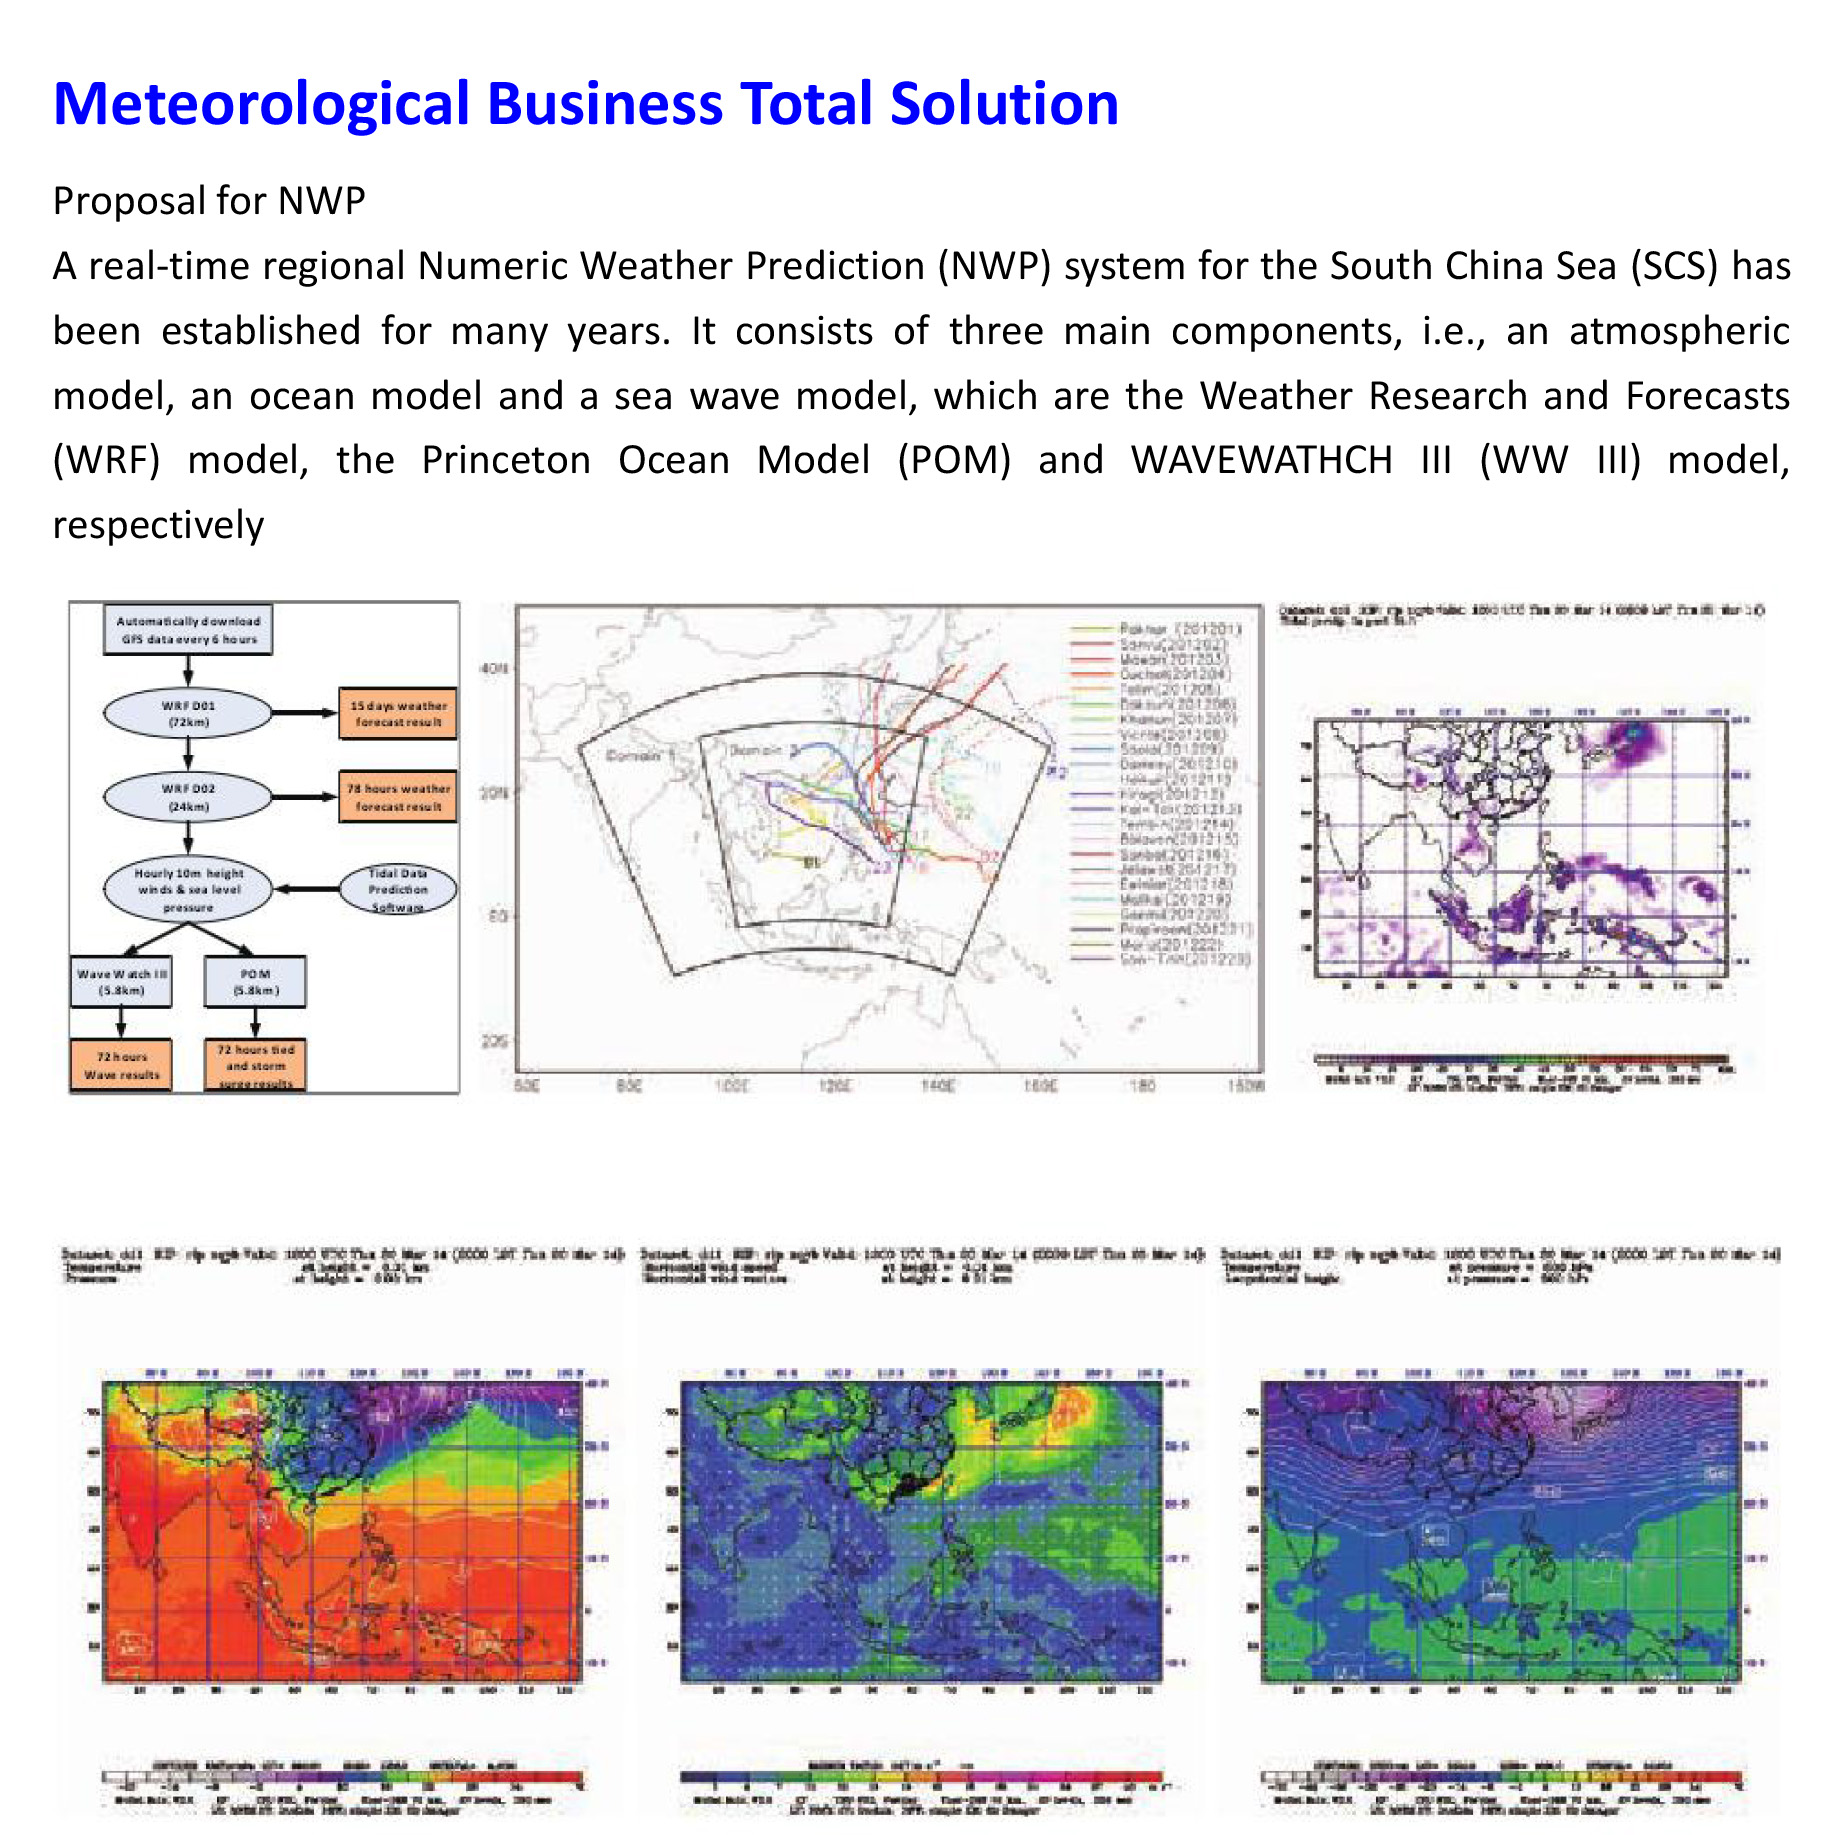 Meteorological Business Total Solution 2